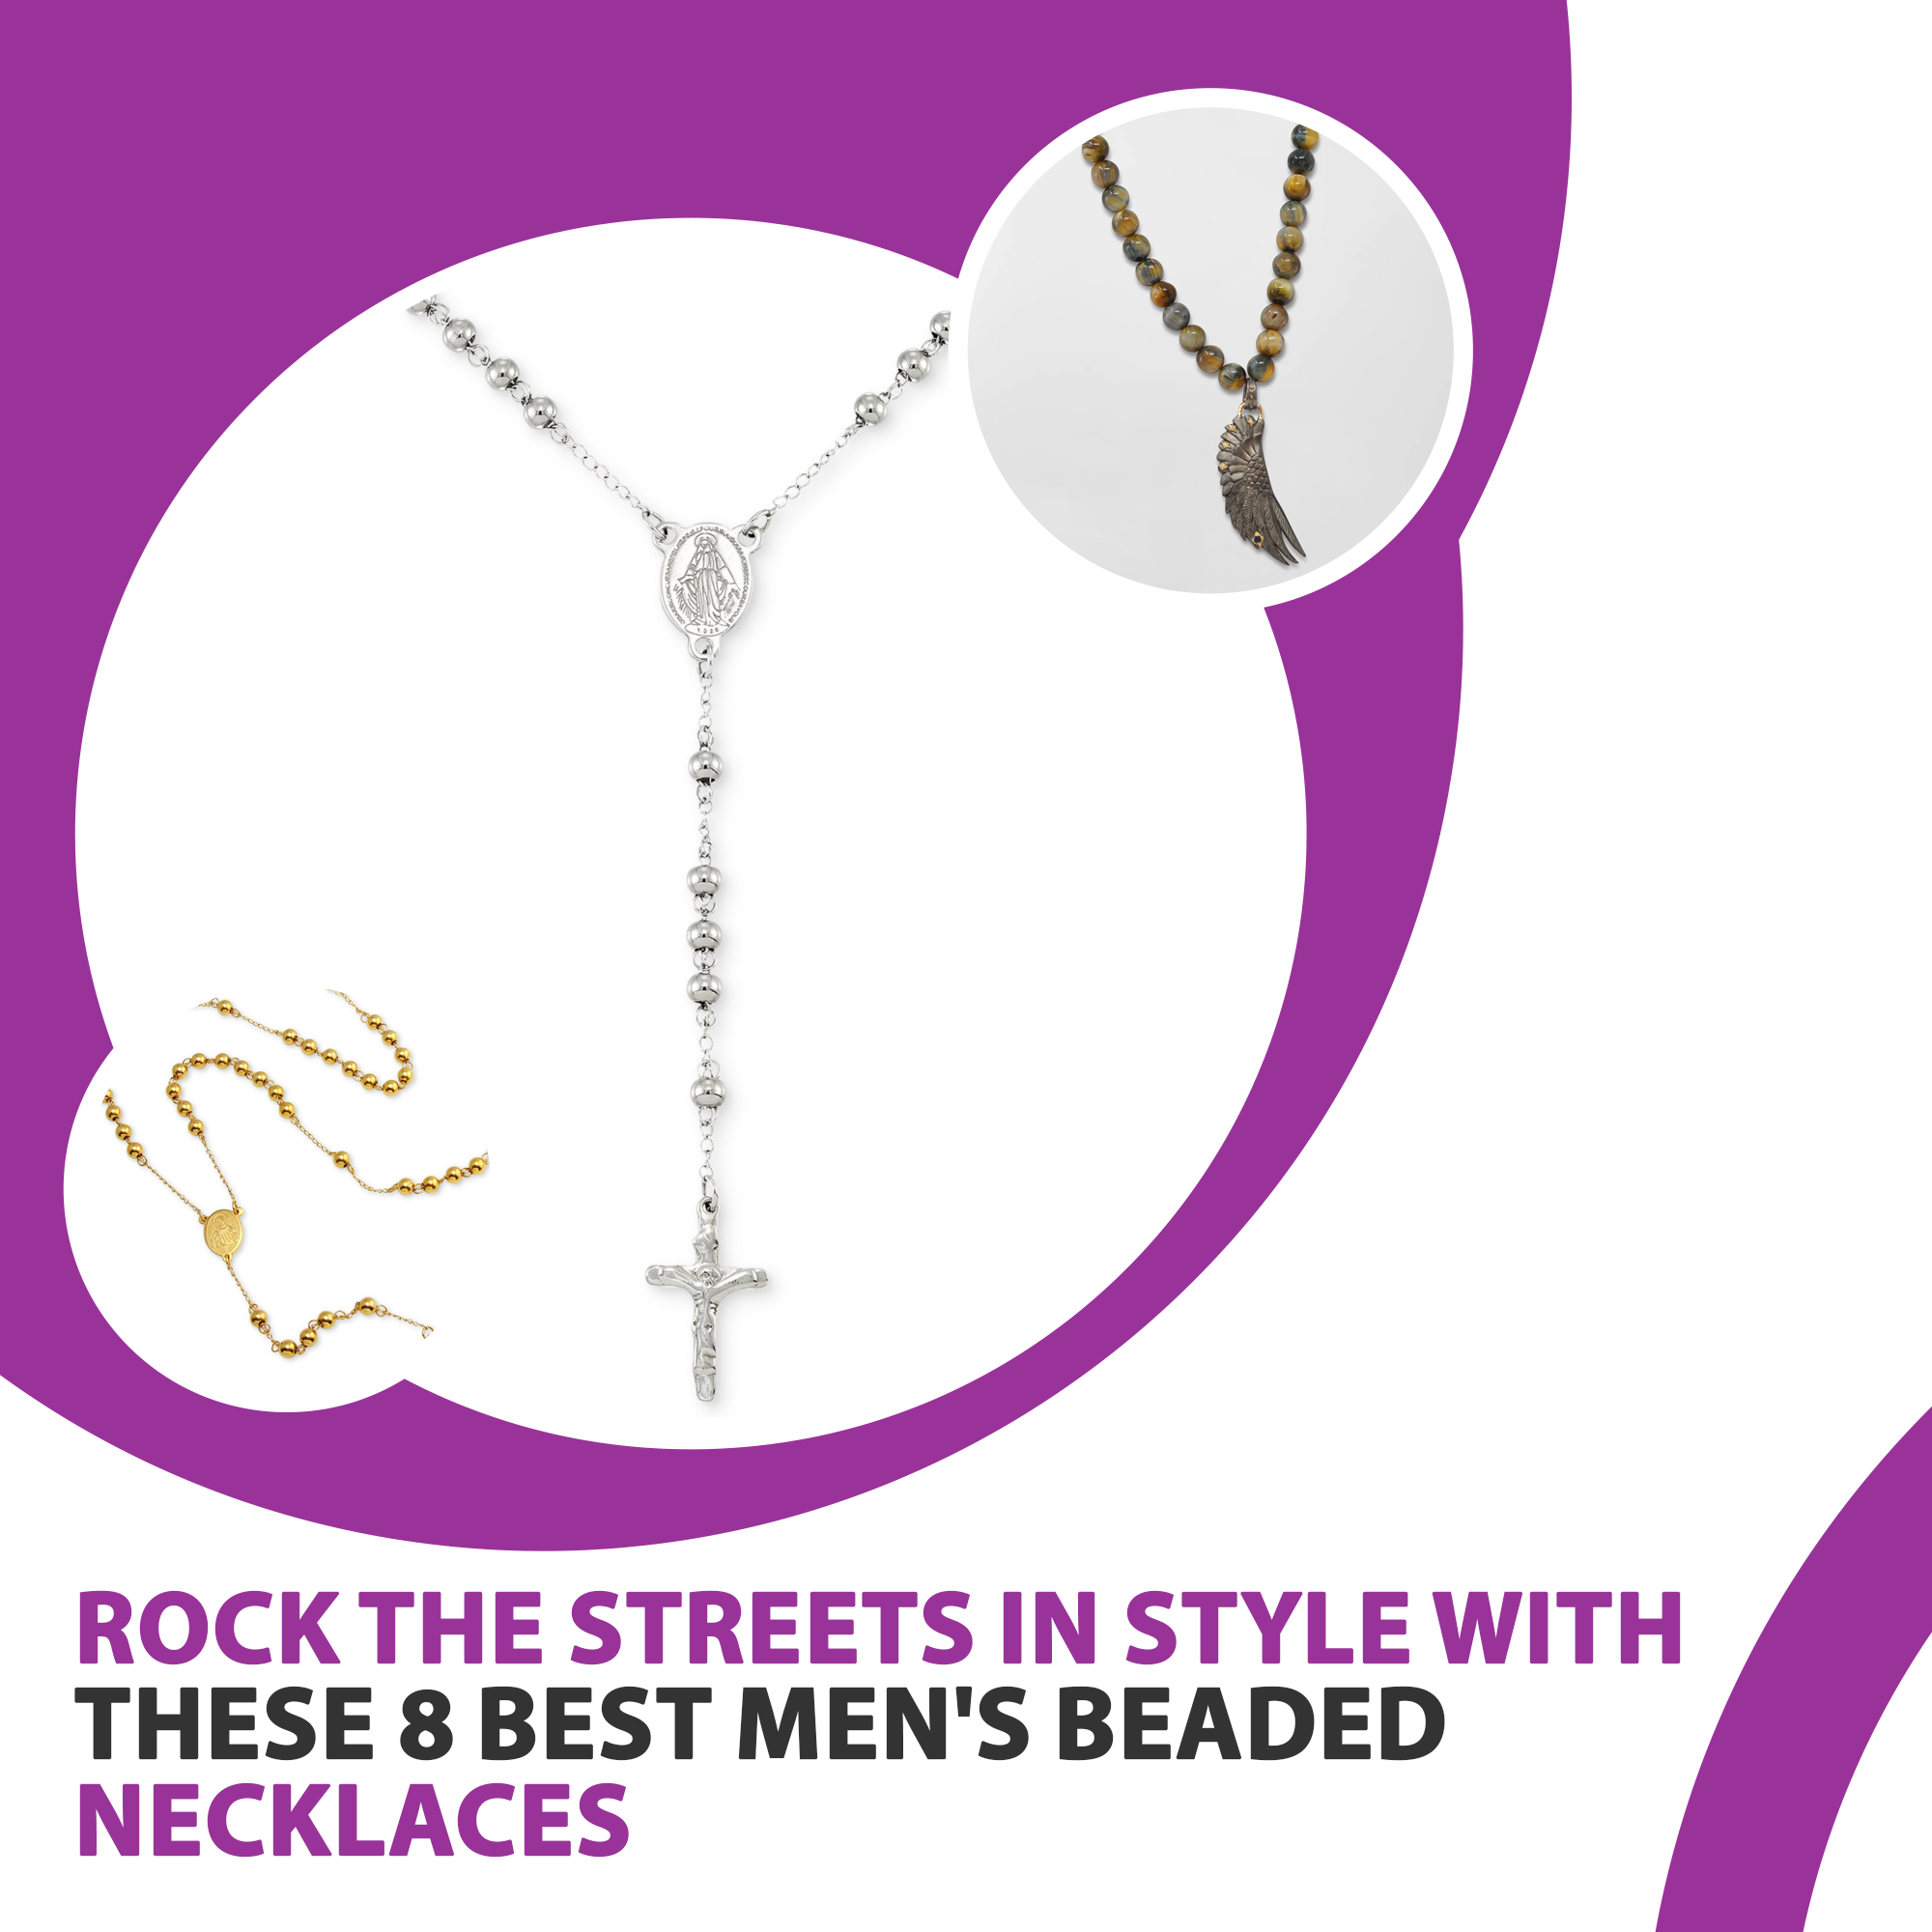 Rock the Streets in Style with These 8 Best Men’s Beaded Necklaces